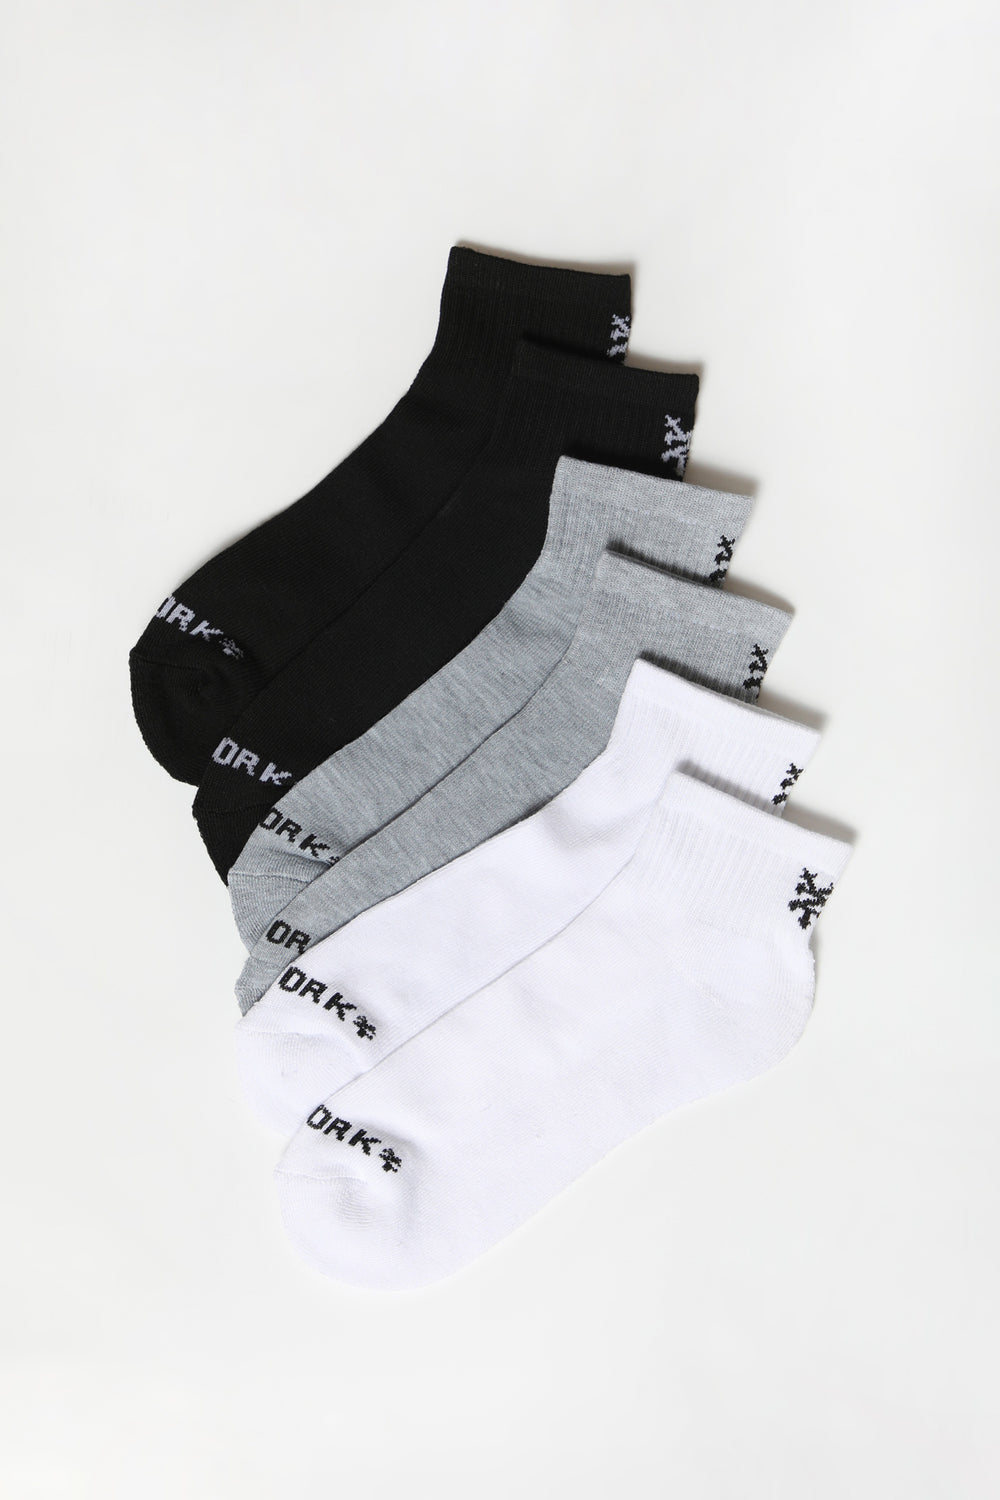 Zoo York Youth 6-Pack Athletic Ankle Socks Zoo York Youth 6-Pack Athletic Ankle Socks